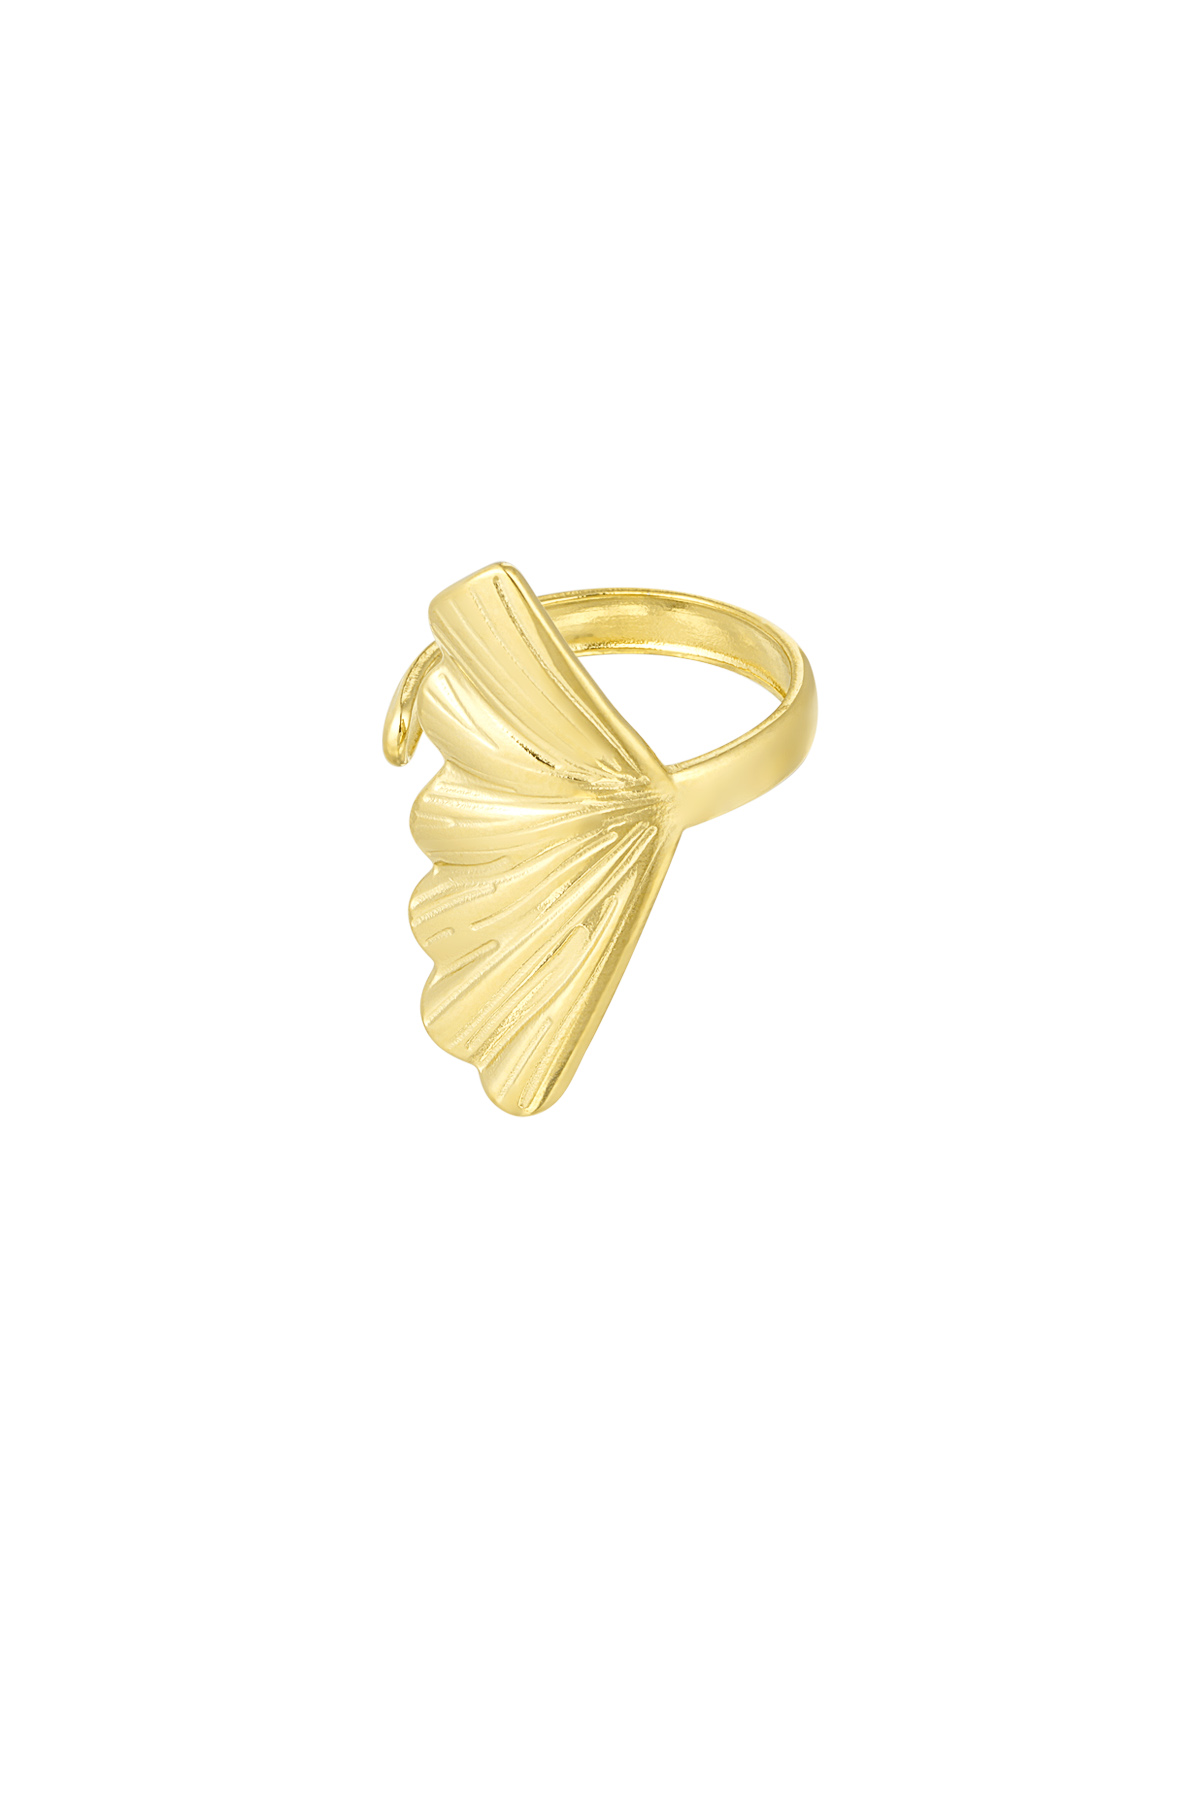 Ring sea side - gold h5 